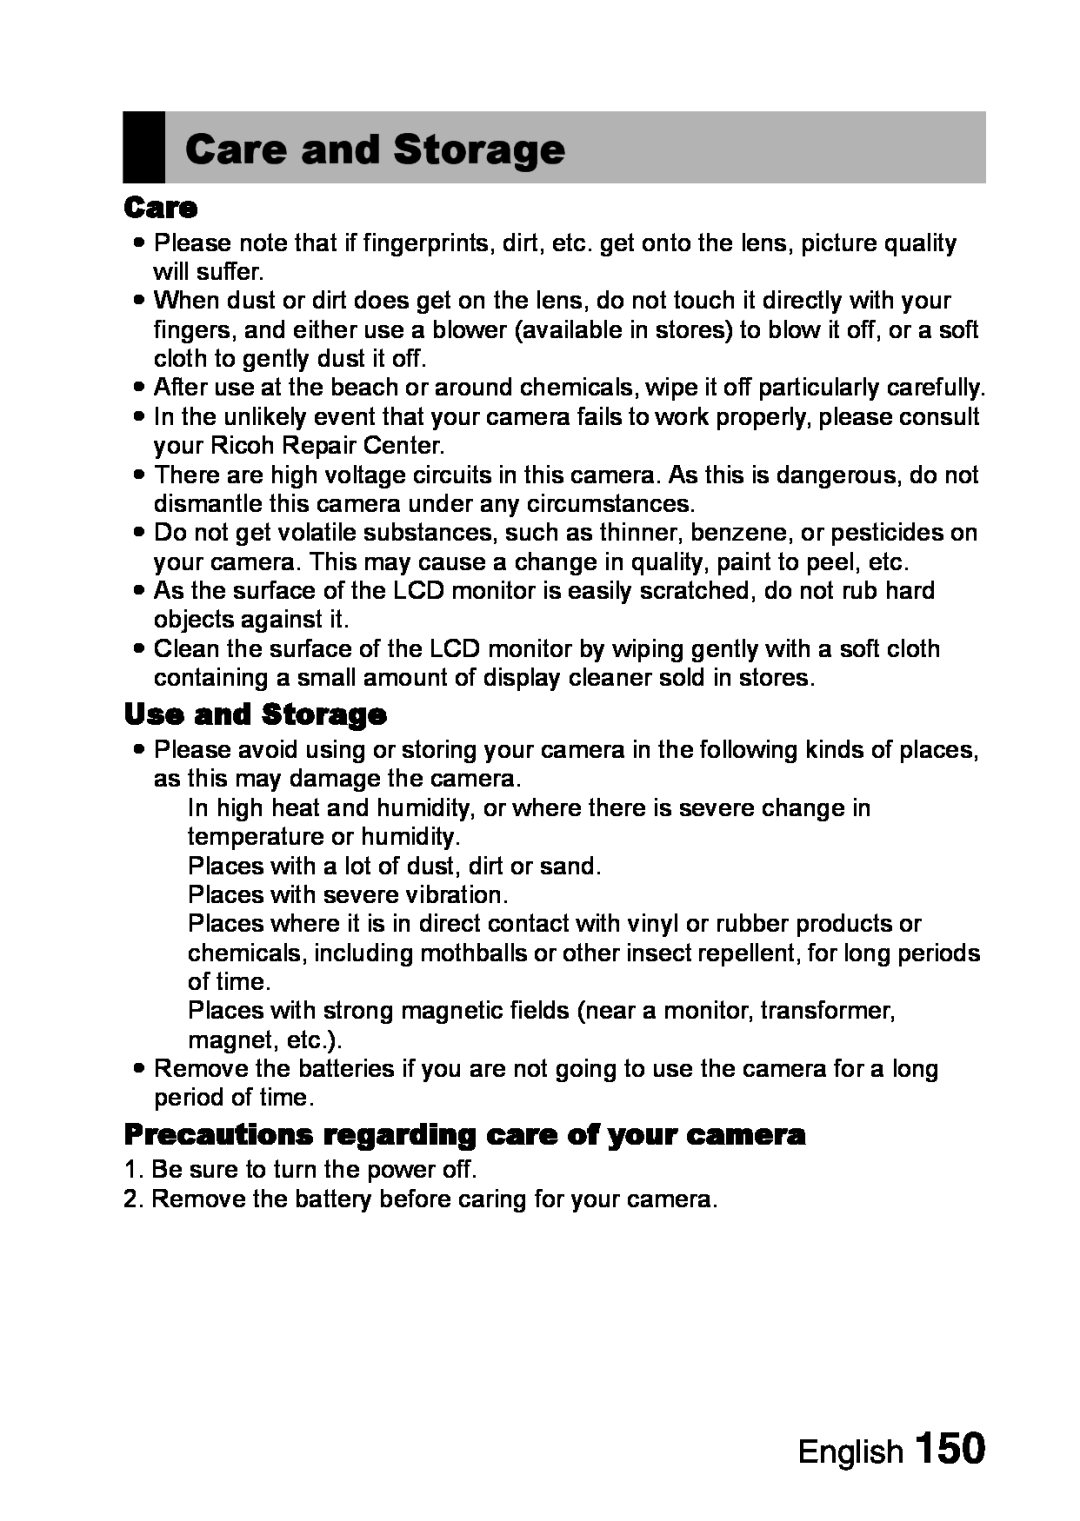 Samsung R50 instruction manual Care and Storage, English, Use and Storage, Precautions regarding care of your camera 